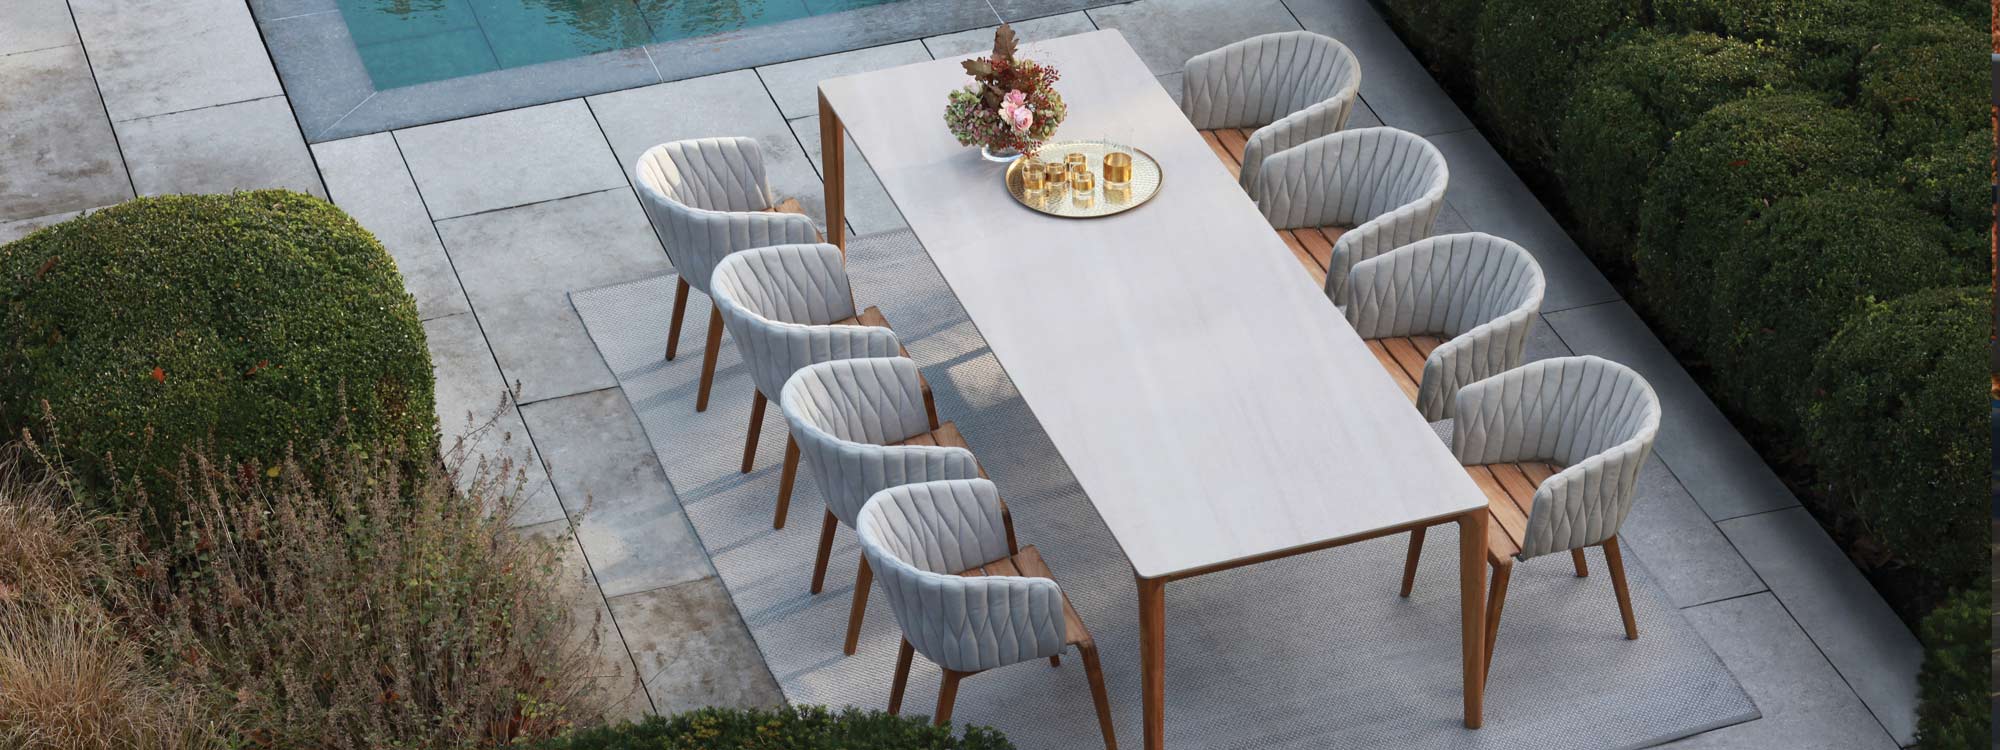 Image of Calypso garden chairs and U-nite teak dining table with ceramic top by Royal Botania